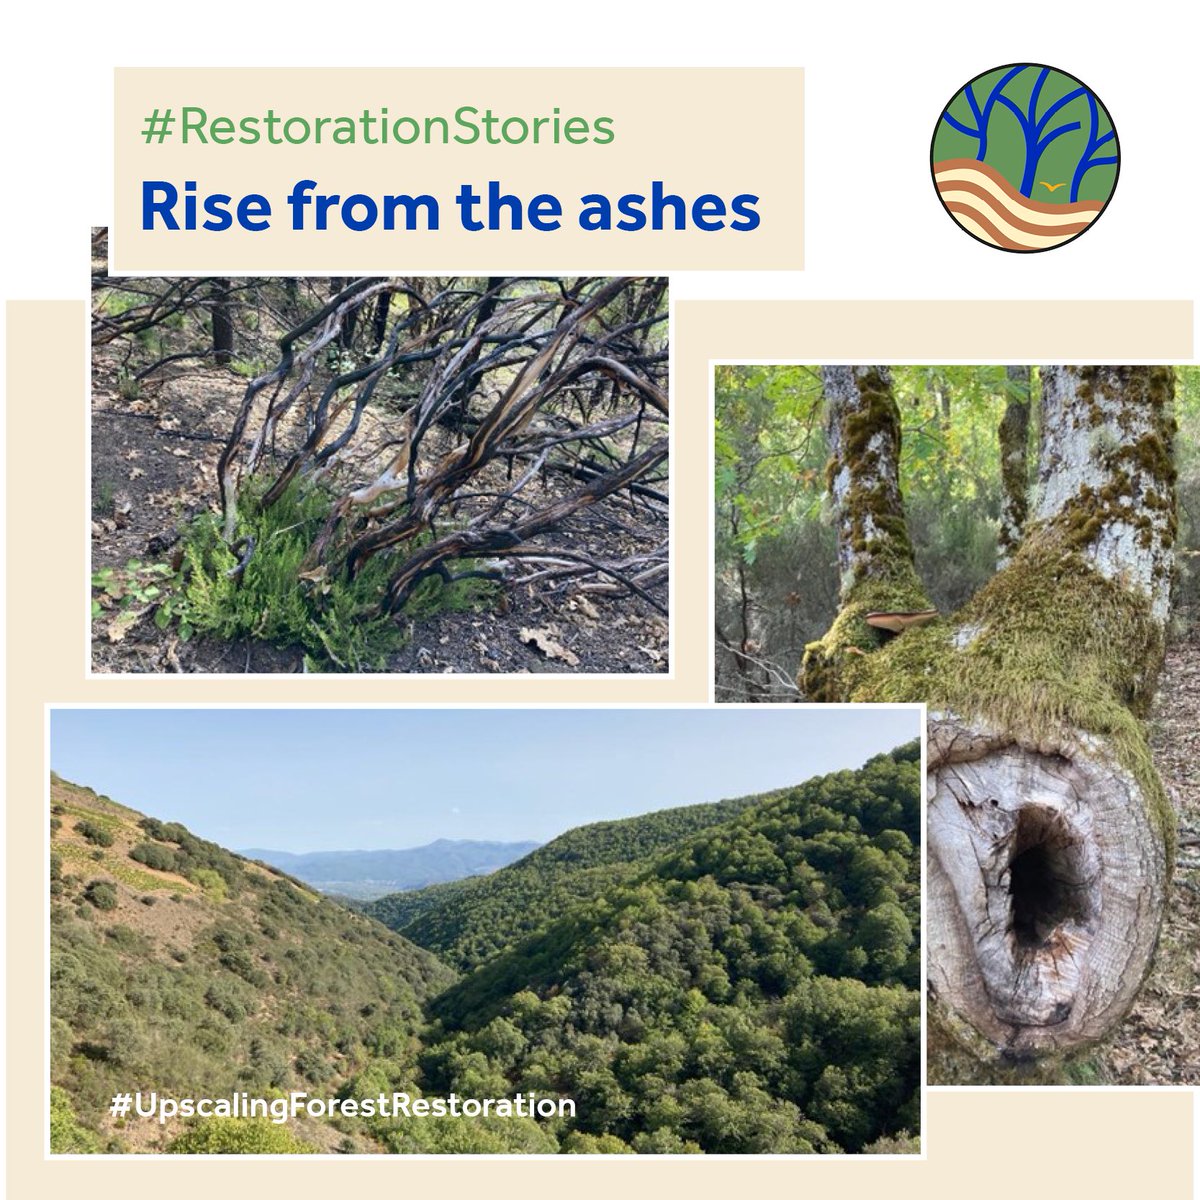 Our Castilla y León demo aims to improve the #habitat of the #brownbear, while engaging the rural population. This #RestorationStory explores with @WUR & @FCesefor colleagues both challenges like #forestfire & #forest degradation as well as solutions resilience-blog.com/2022/10/20/ris…